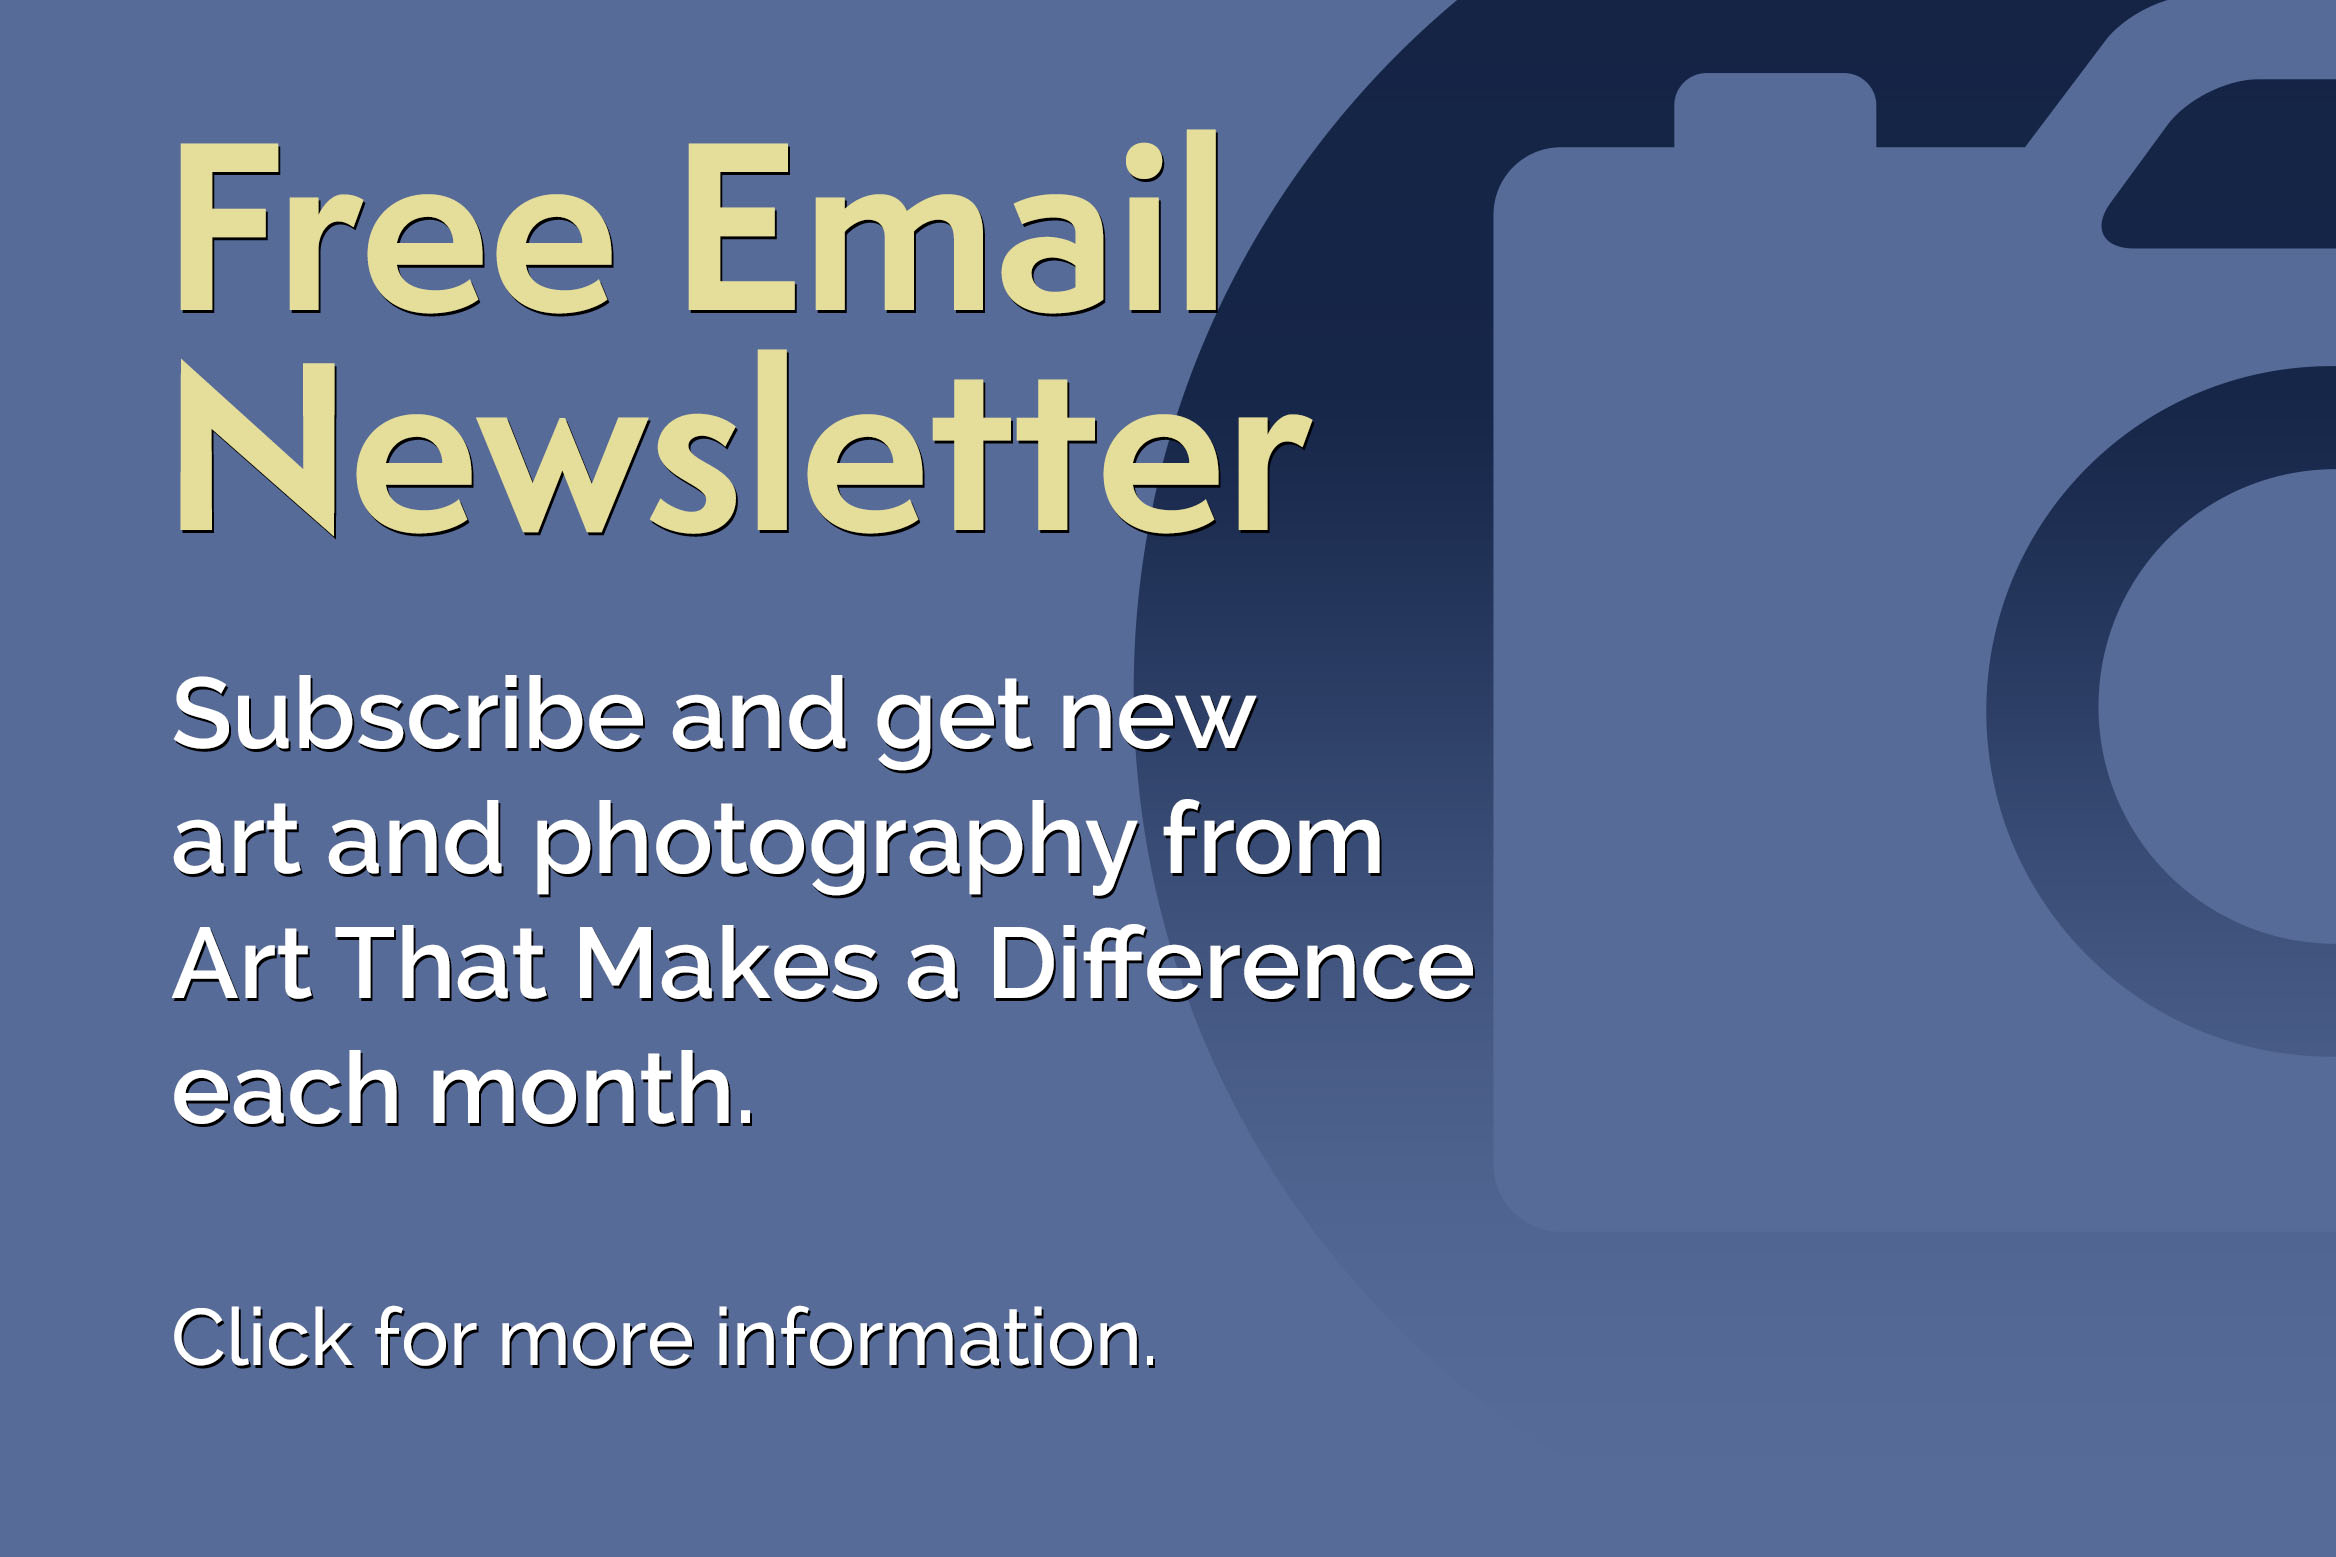 Free Email Newsletter